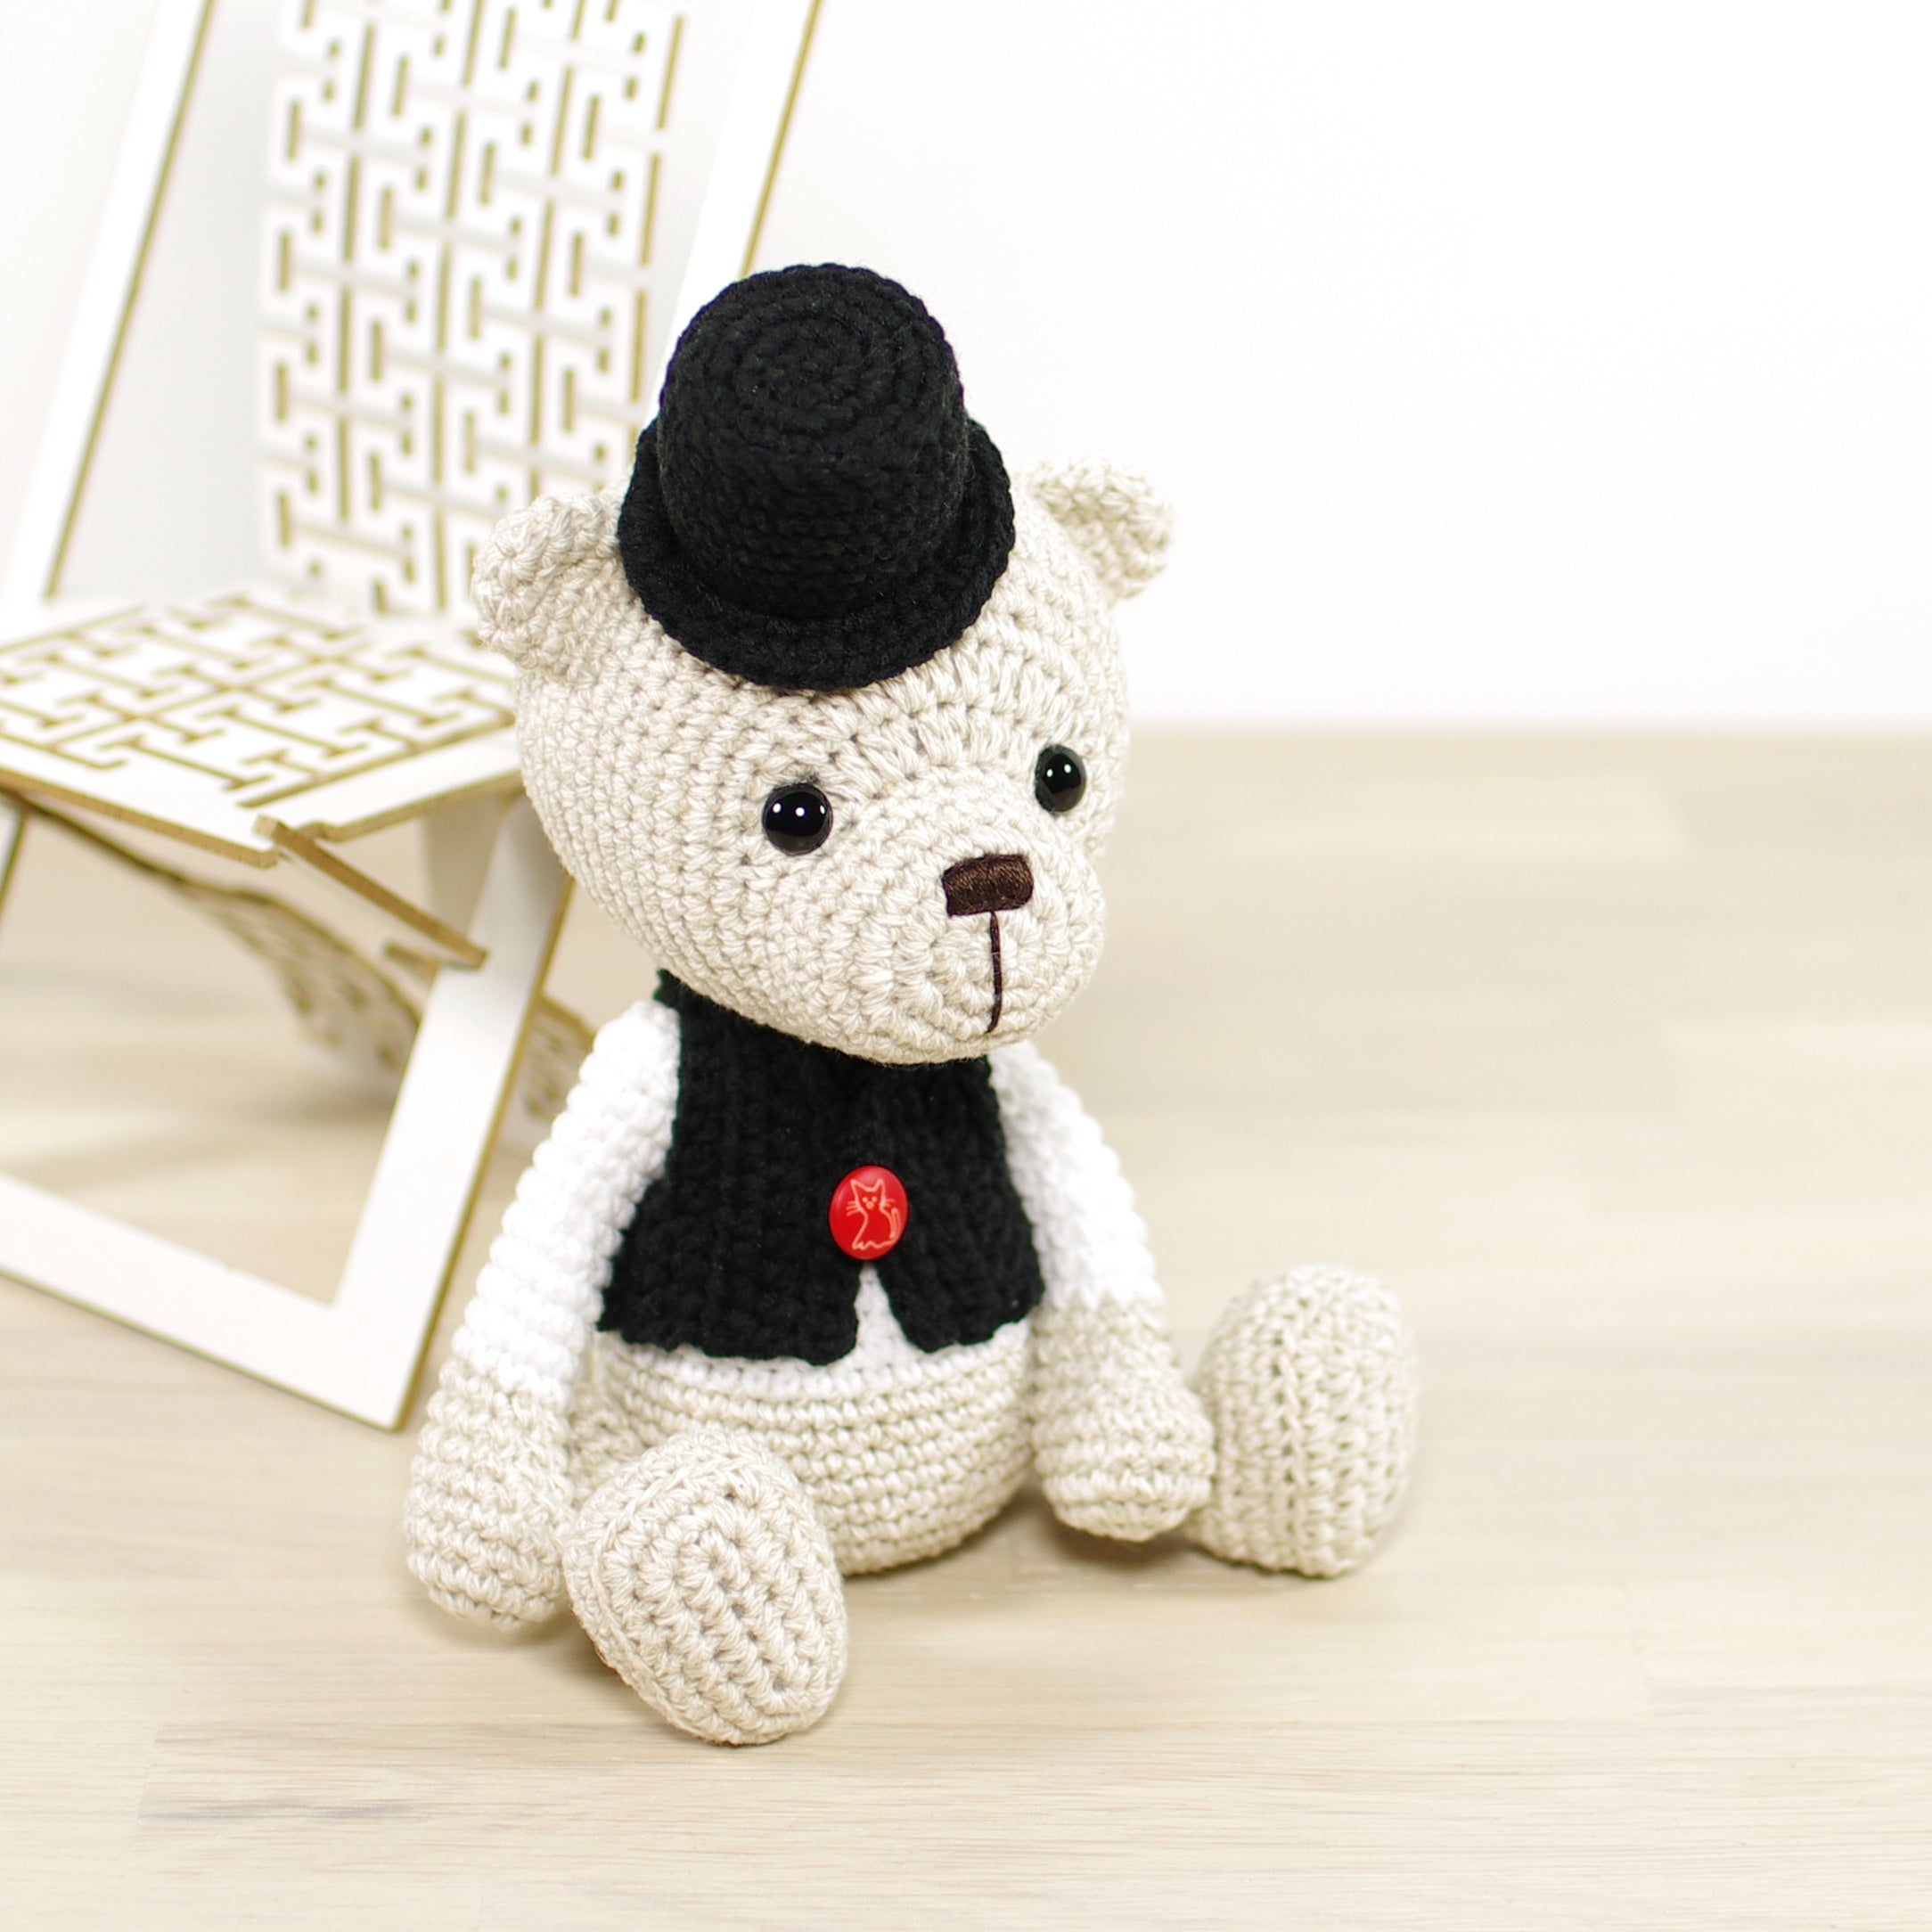 PATTERN: Teddy Bear in a Top Hat and Vest – Kristi Tullus